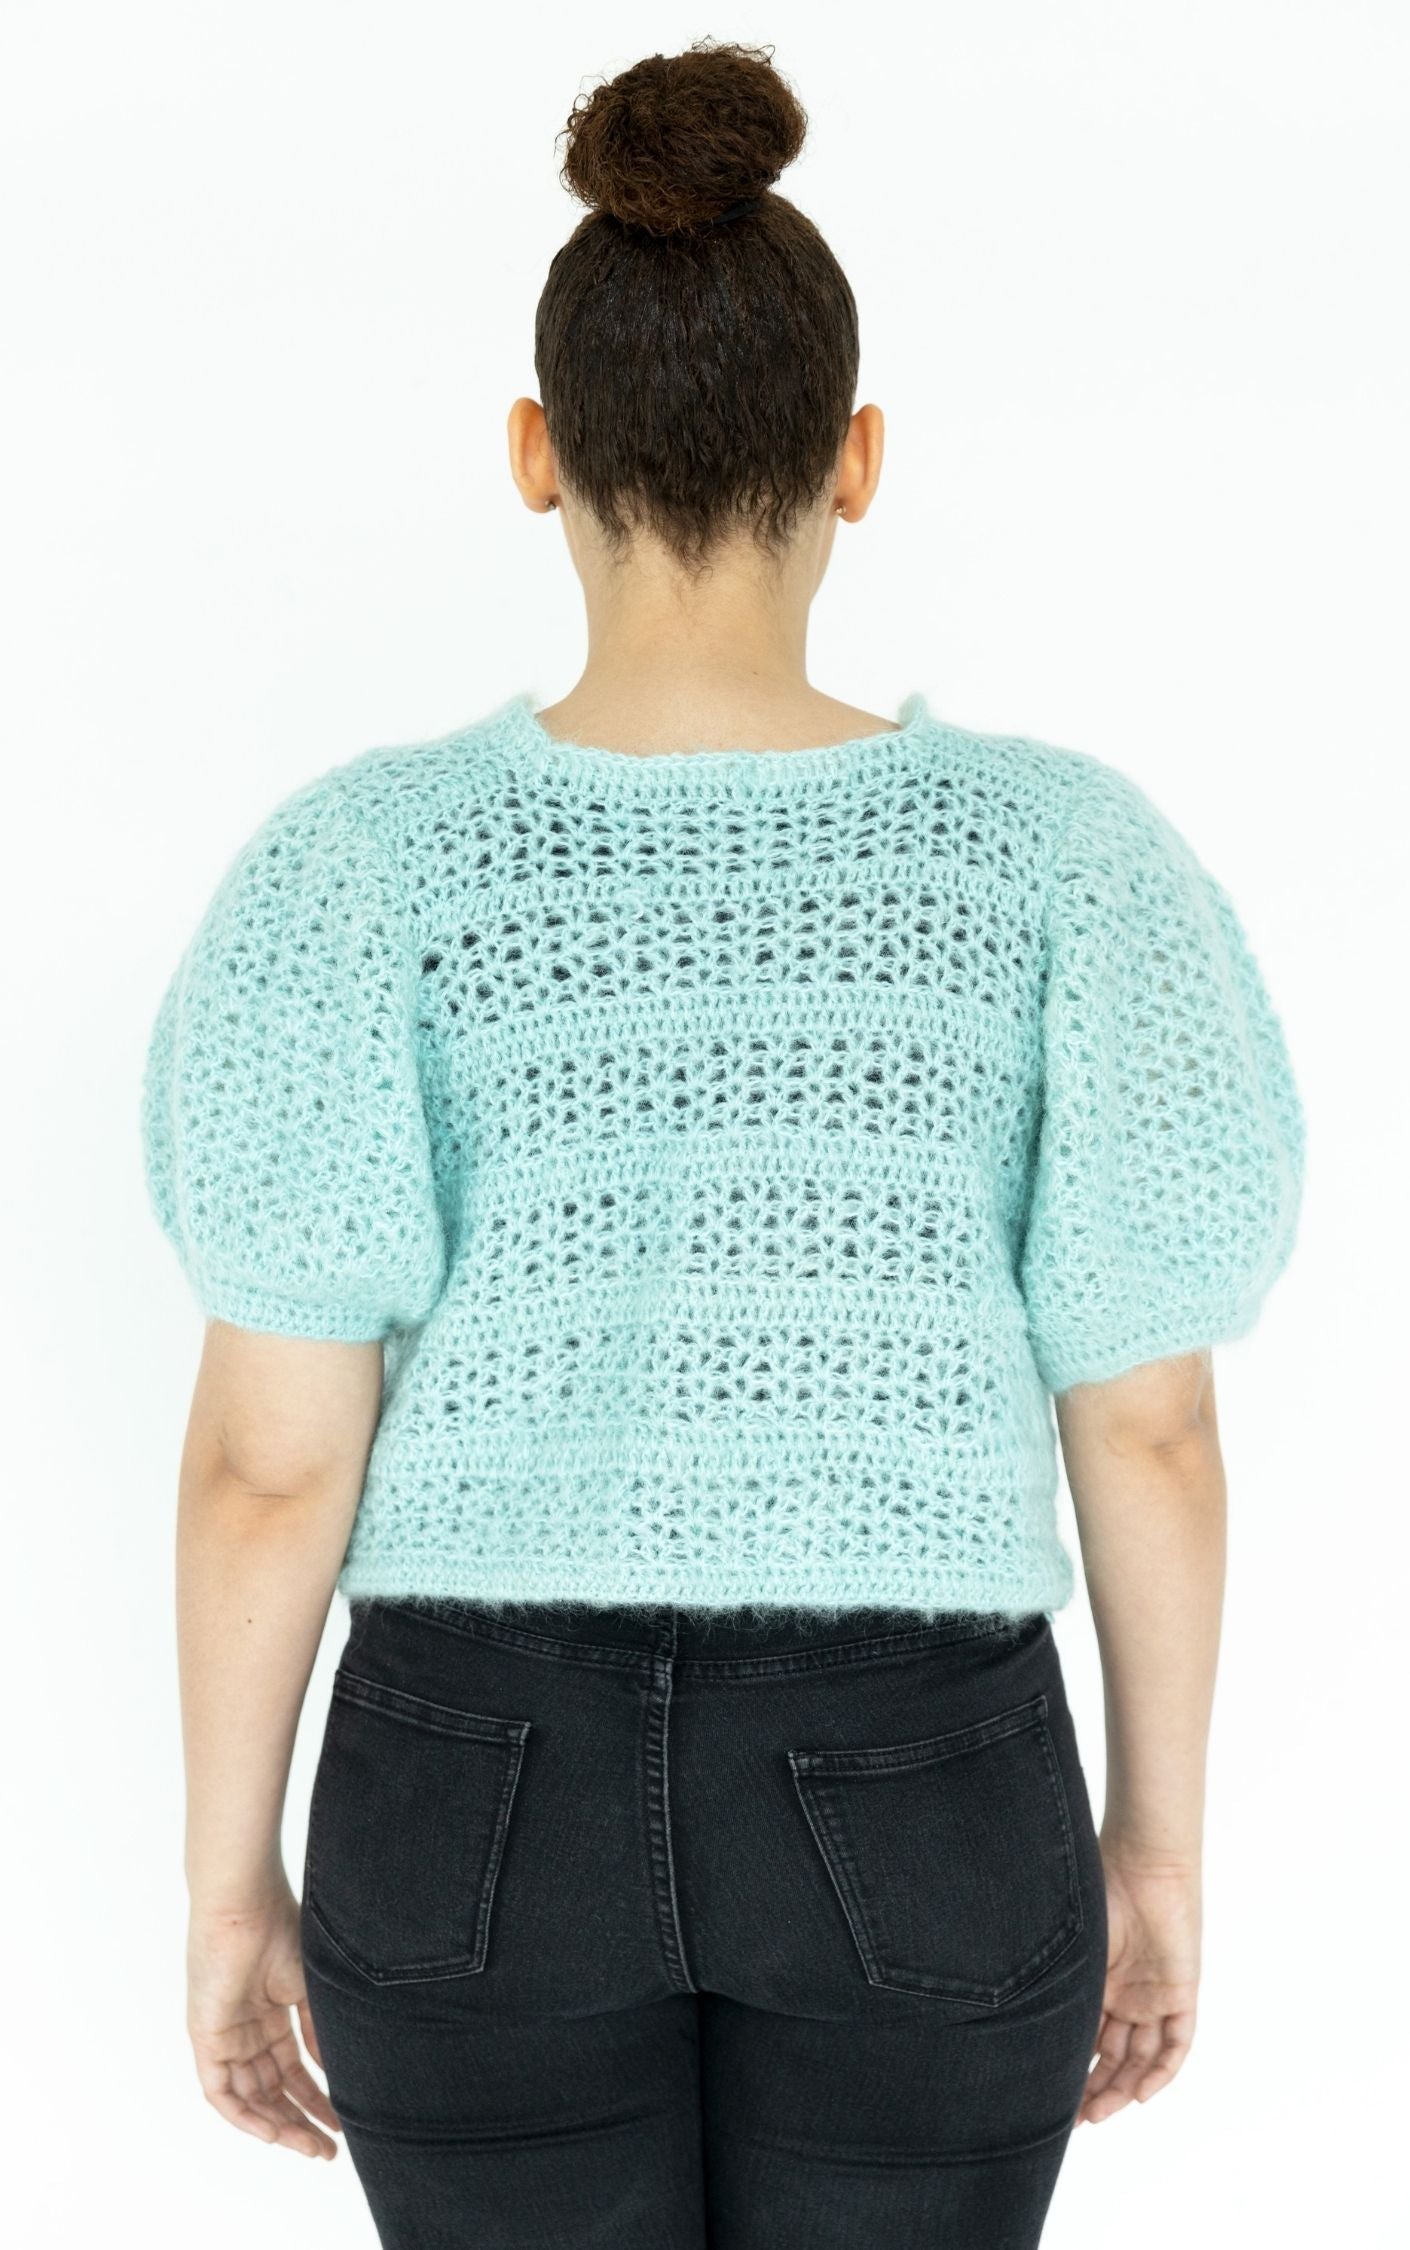 VINTAGE Knitted Crochet Puff Sleeve Blue Top